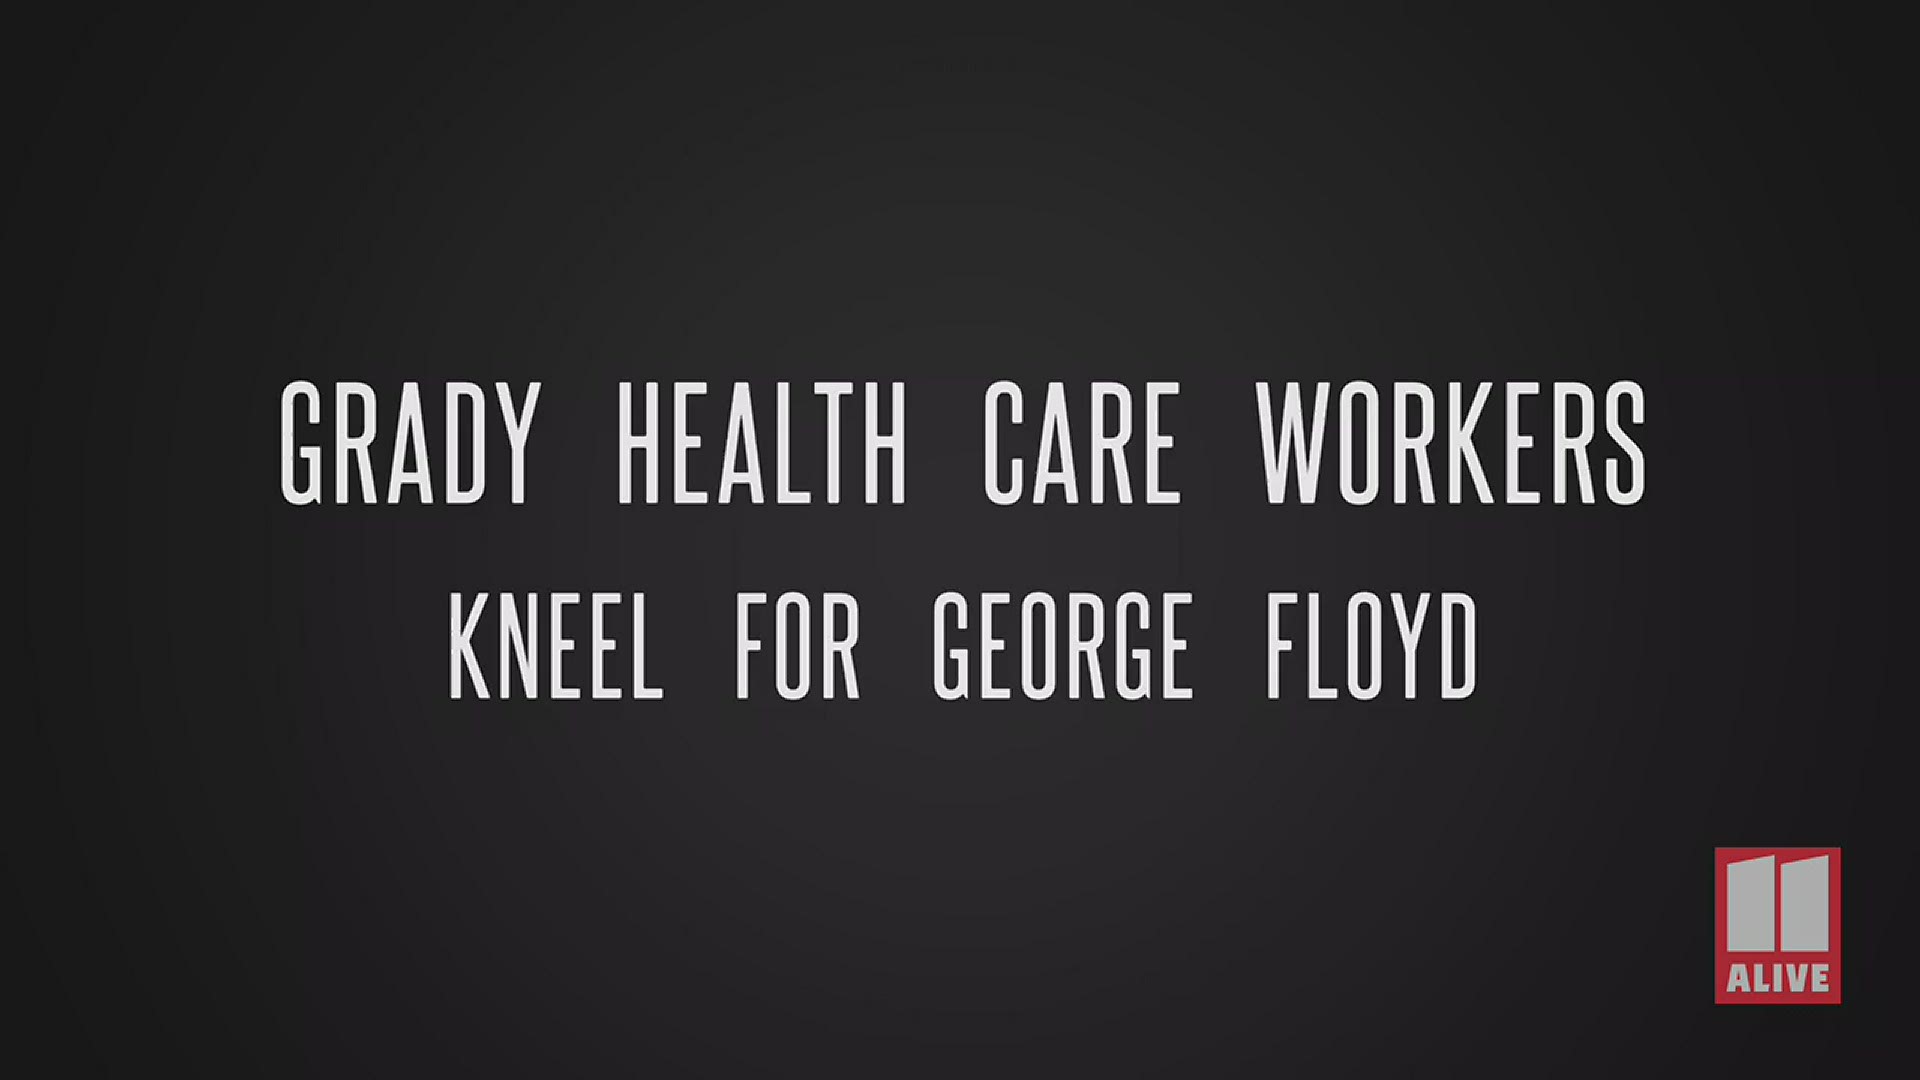 Medical workers at Grady Memorial Hospital took a moment to kneel in memory of George Floyd on Friday, June 5, 2020 amid protests in Atlanta.